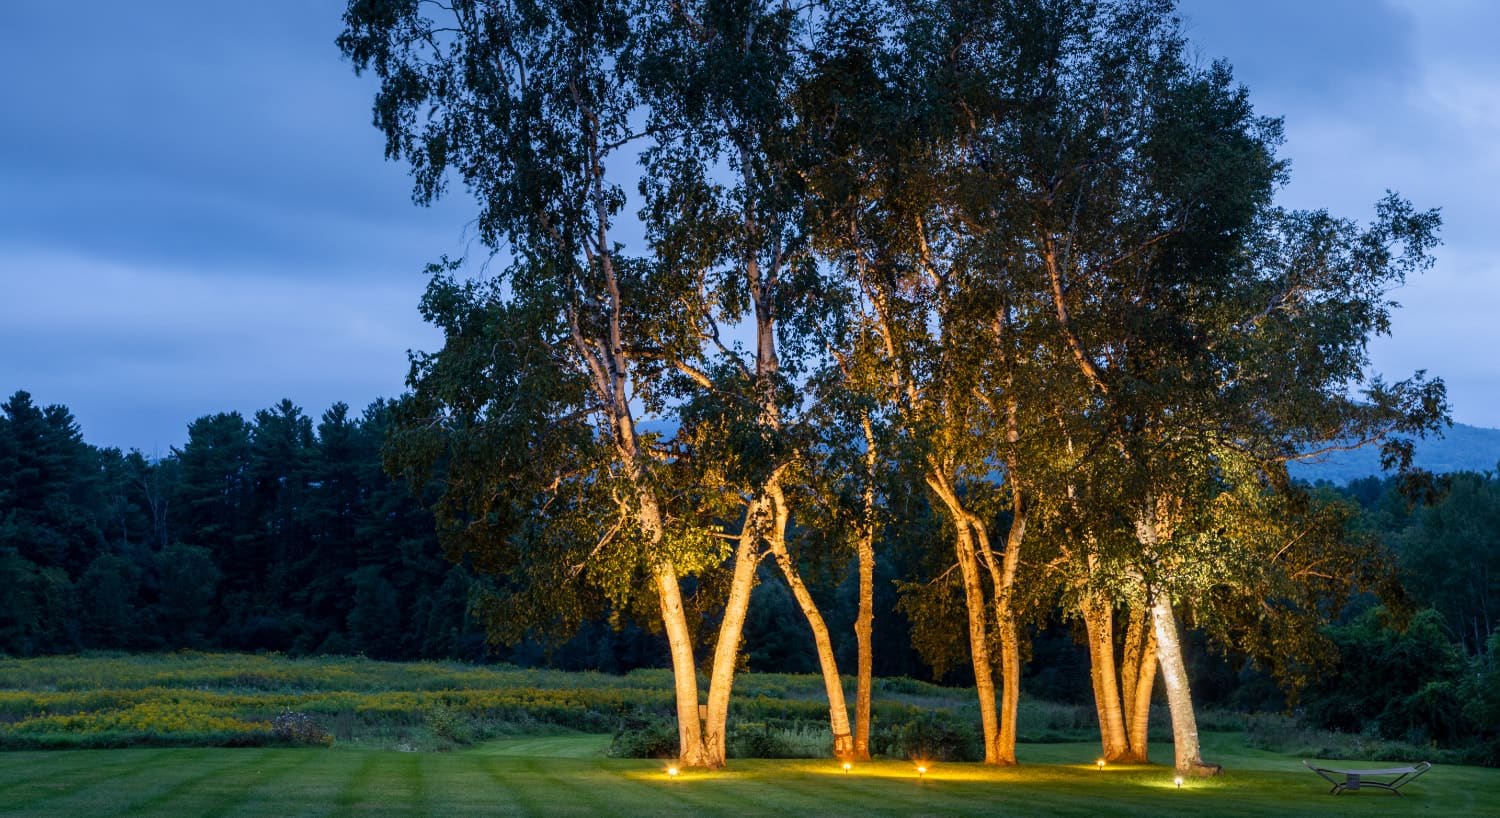 Large trees with accent lighting surrounded by grass and trees at dusk